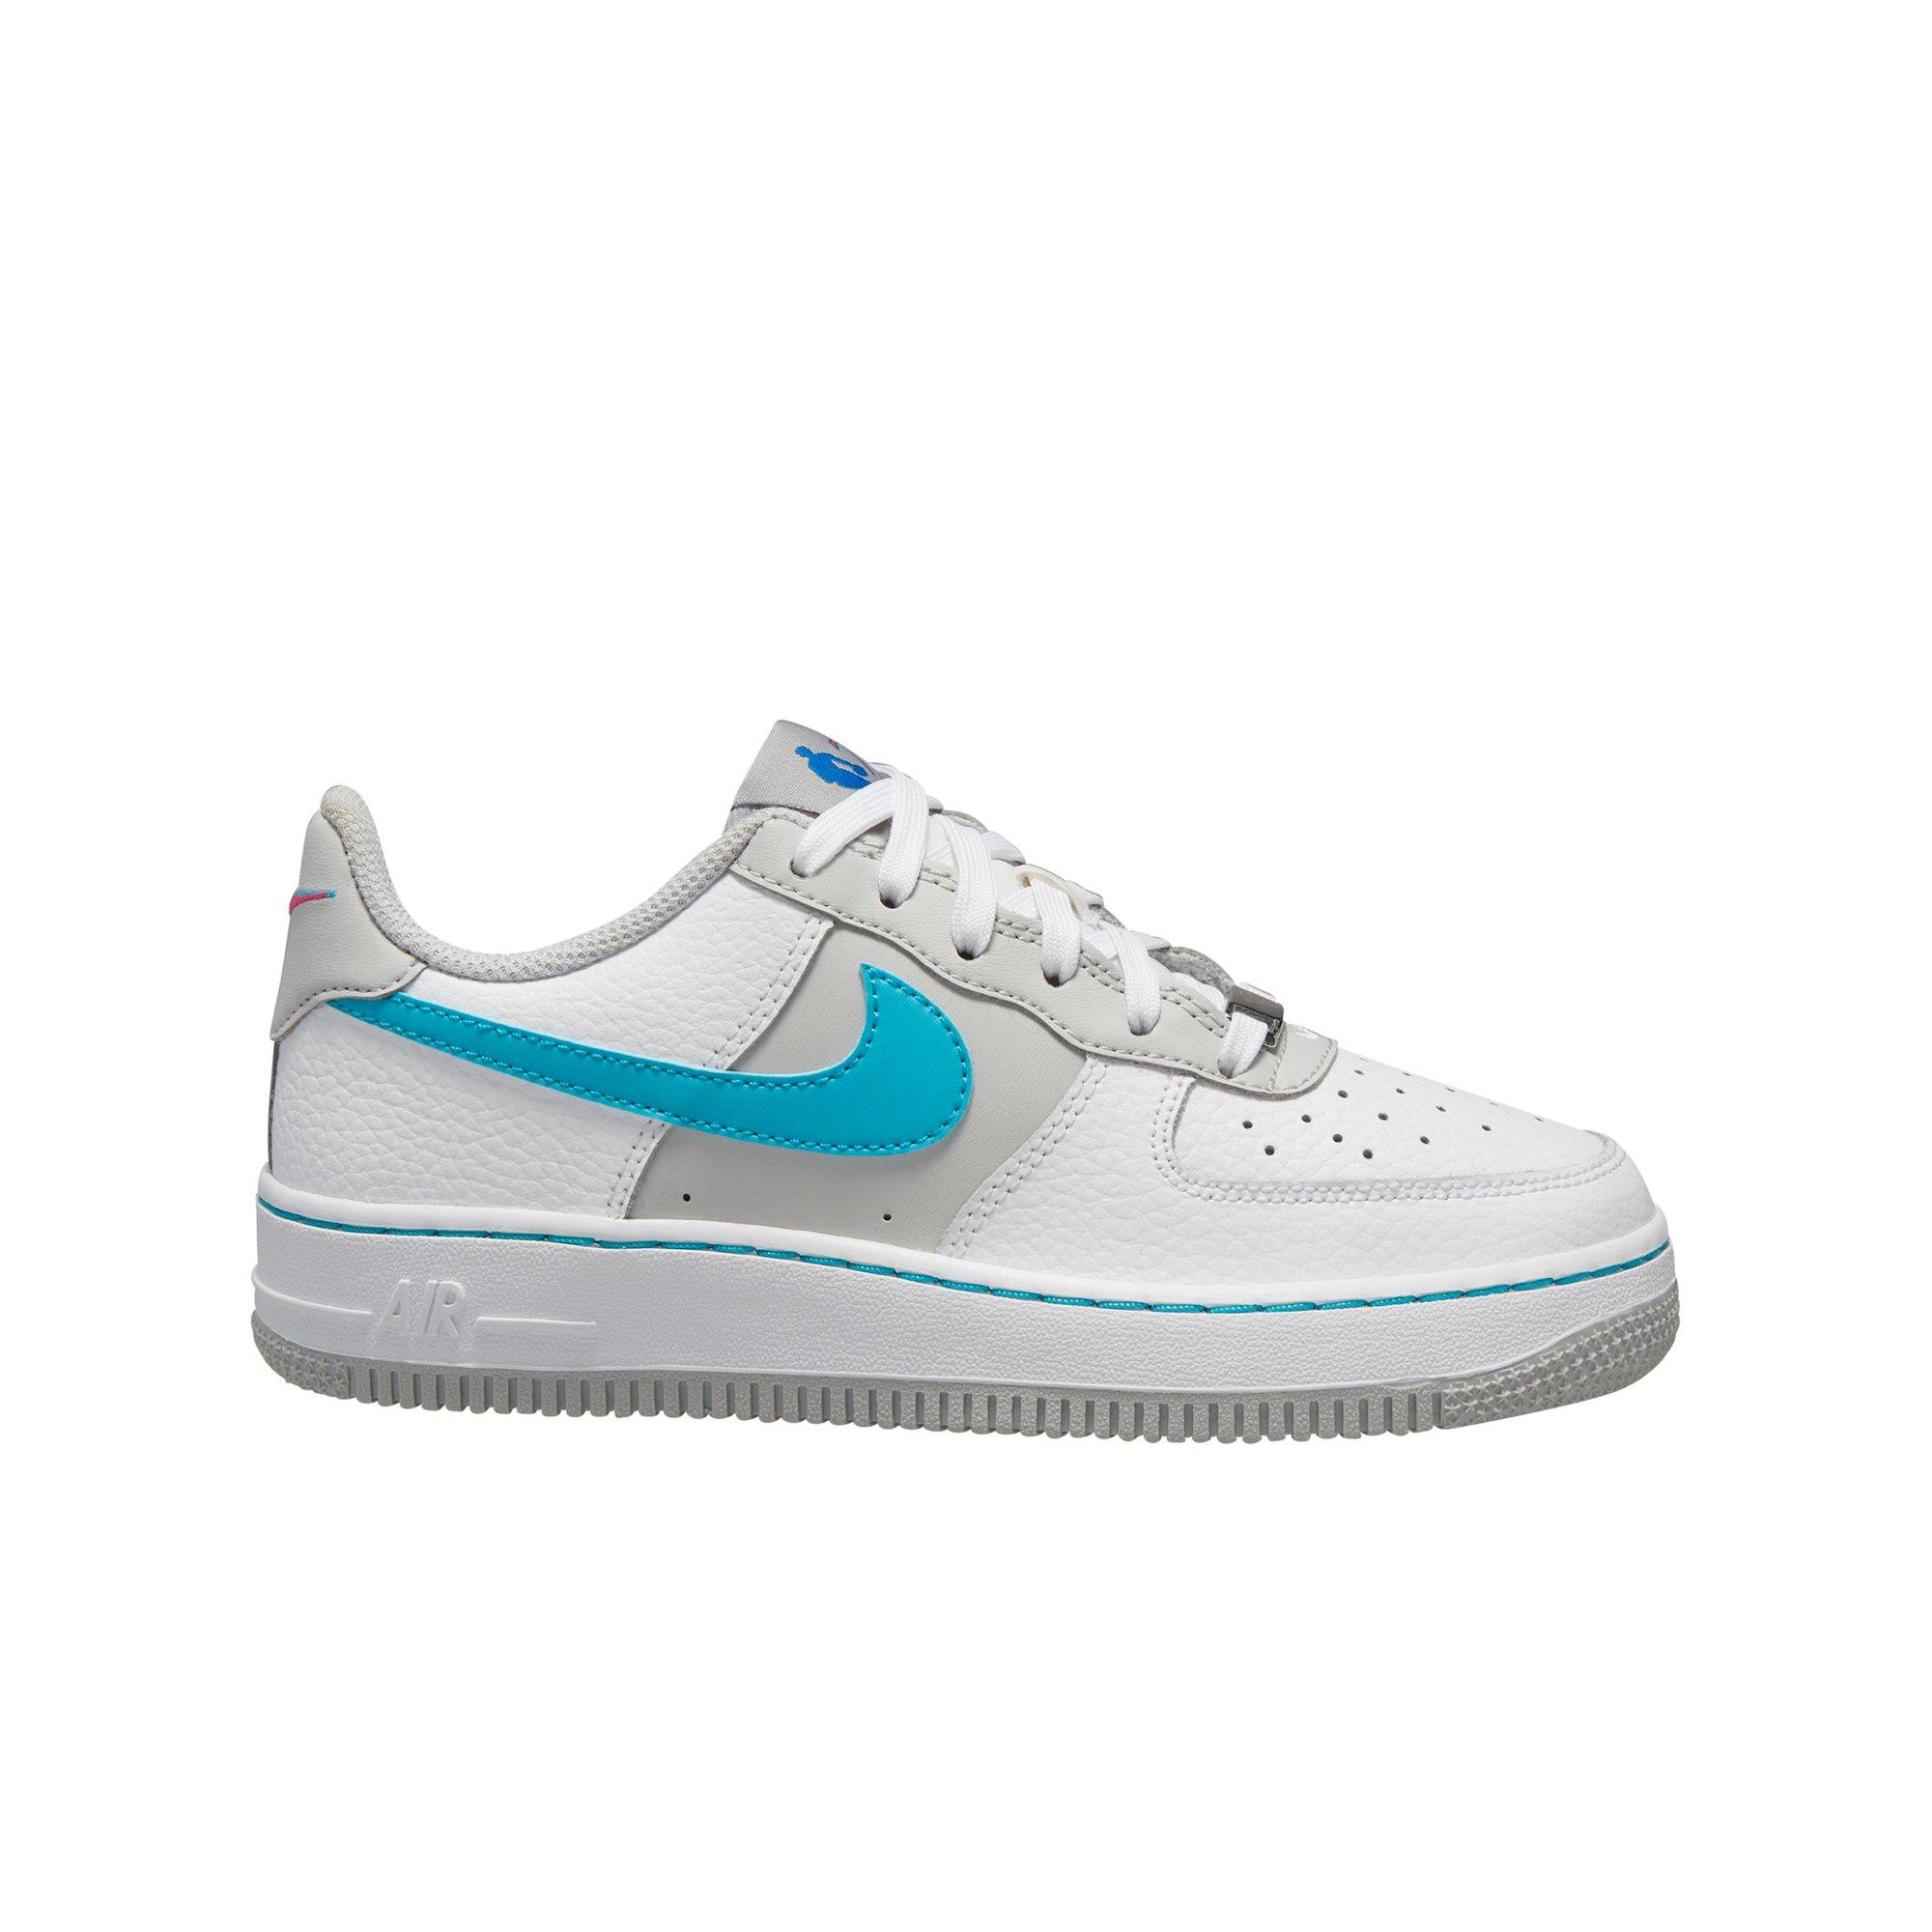 Nike Air Force 1 LV8 3 GS Shoes Unisex Sz 5Y Youth CJ4092-100 Blue Dyed  Sneaker